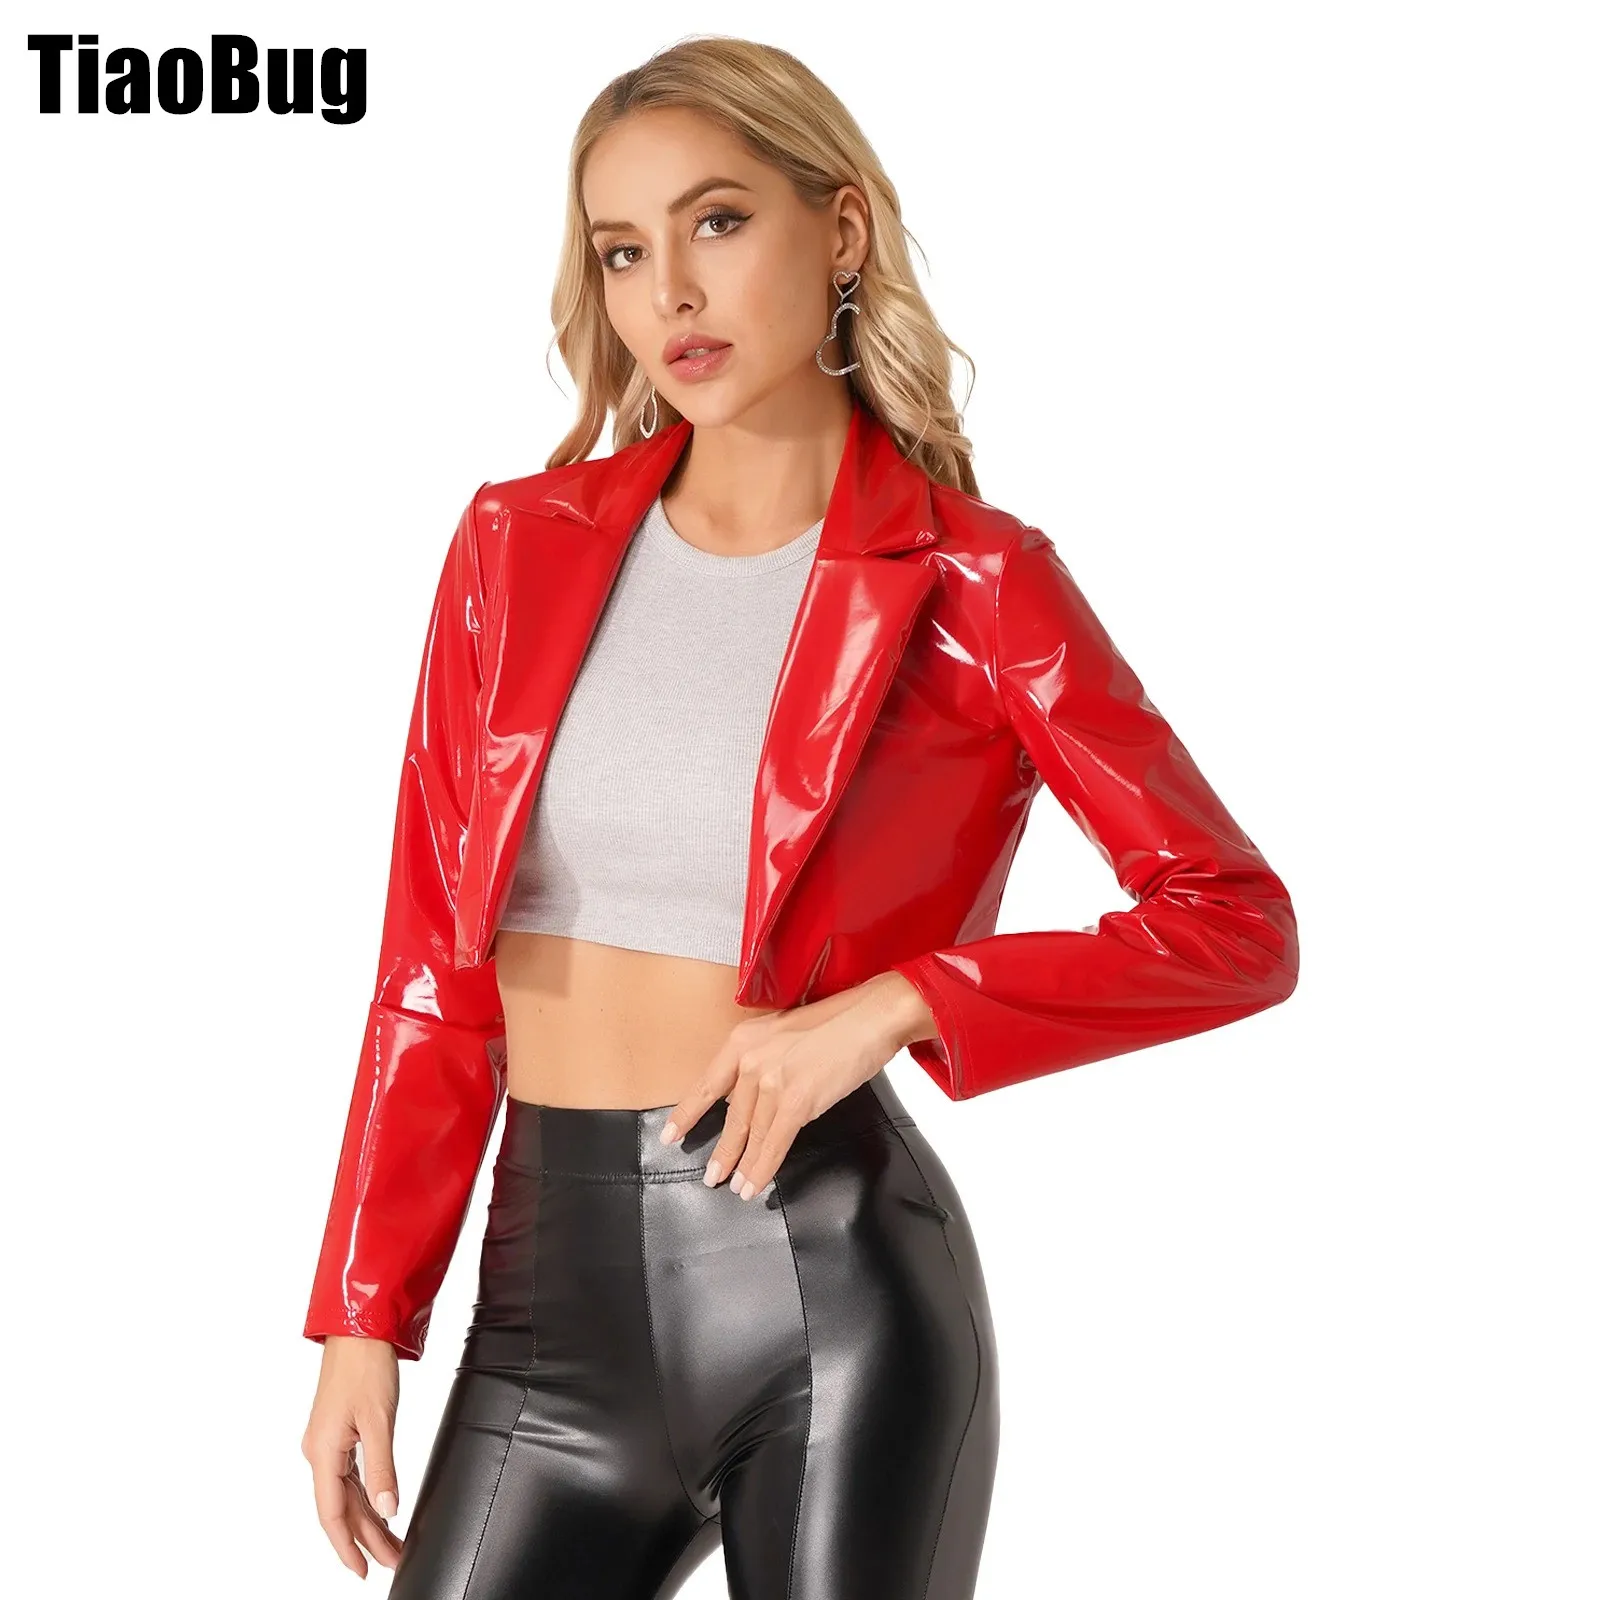 Womens Patent Leather Jacket Fashion Lapel Wet Look Long Sleeve Cropped Coat for Party Club Music Festival